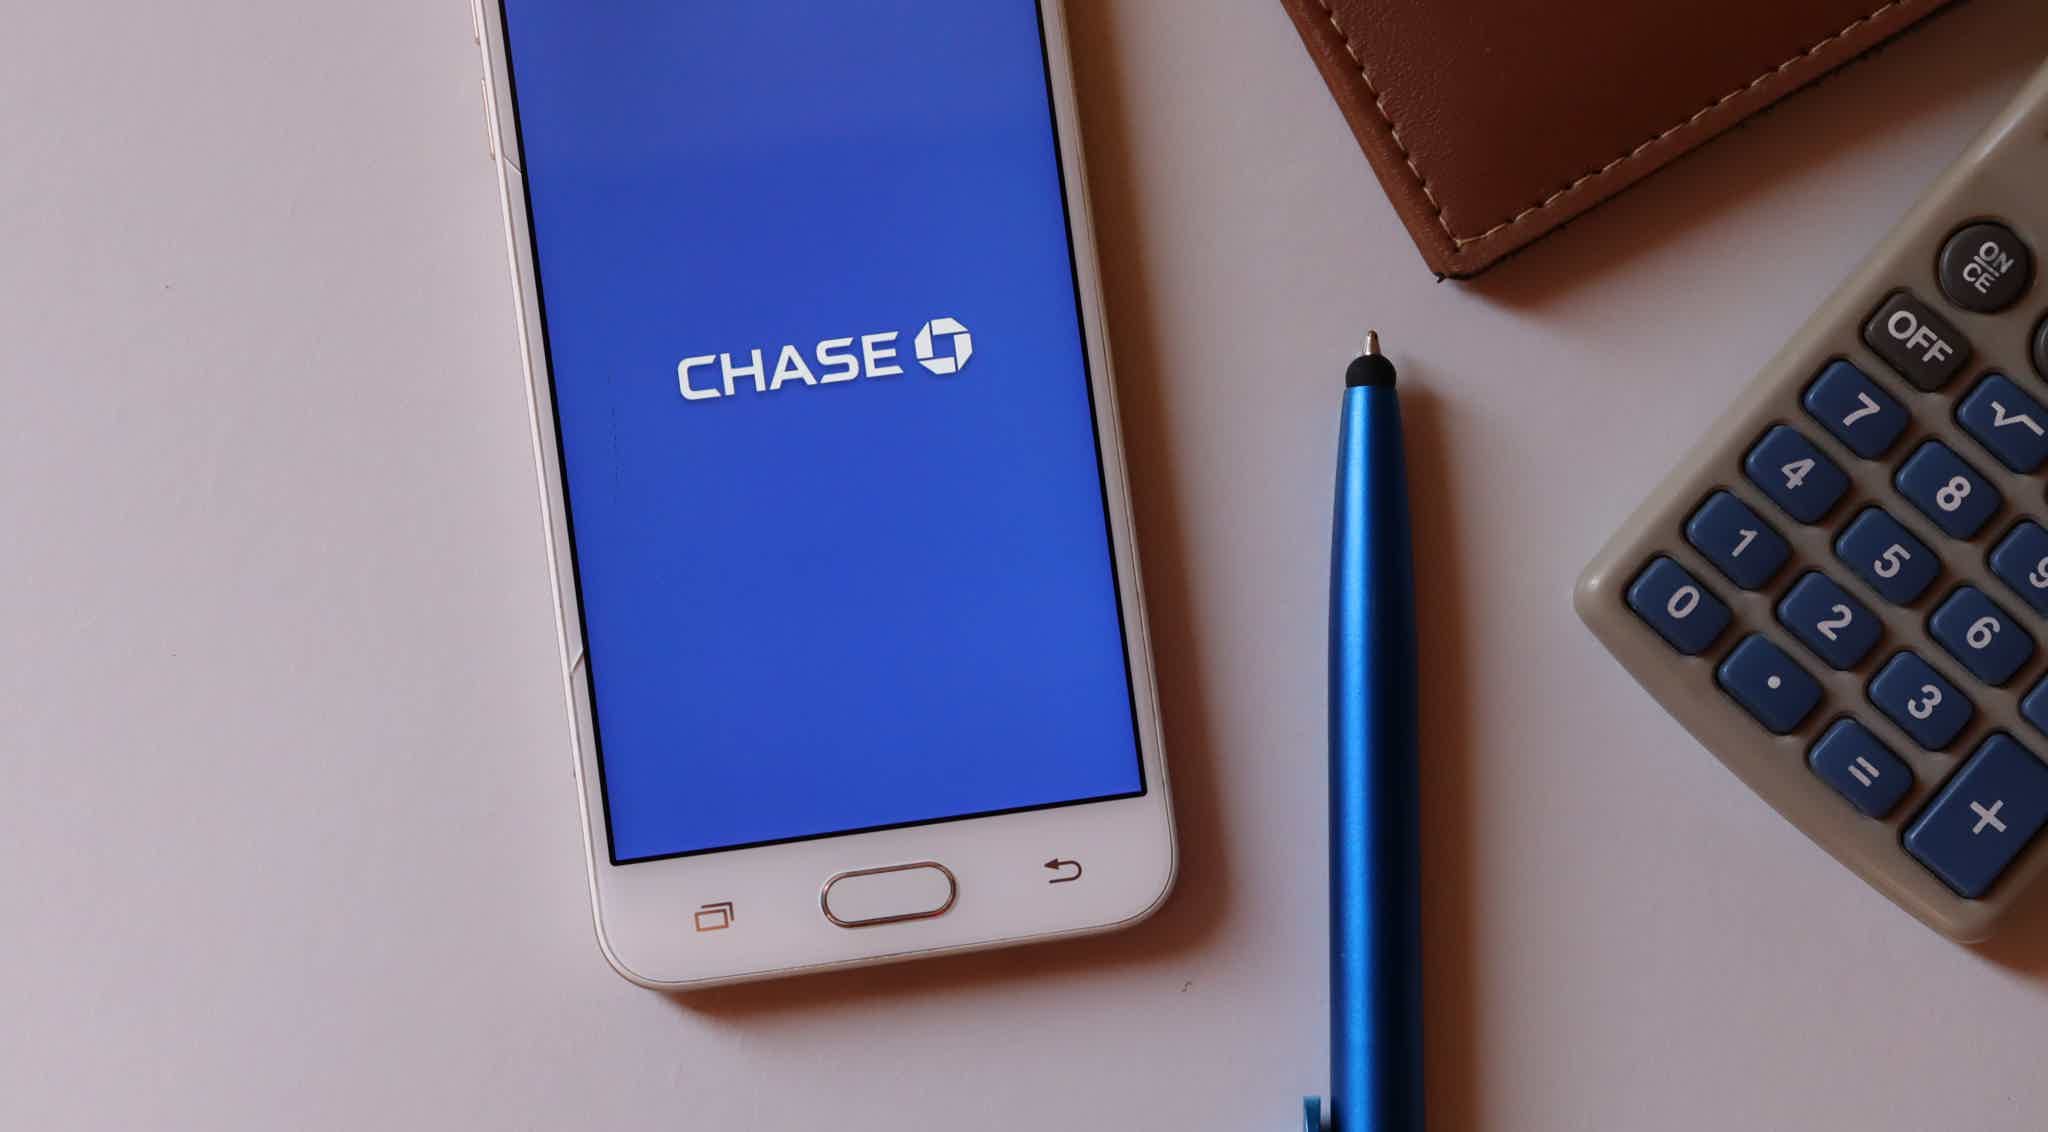 Read this review to find out how banking is with Chase. Source: Adobe Stock.